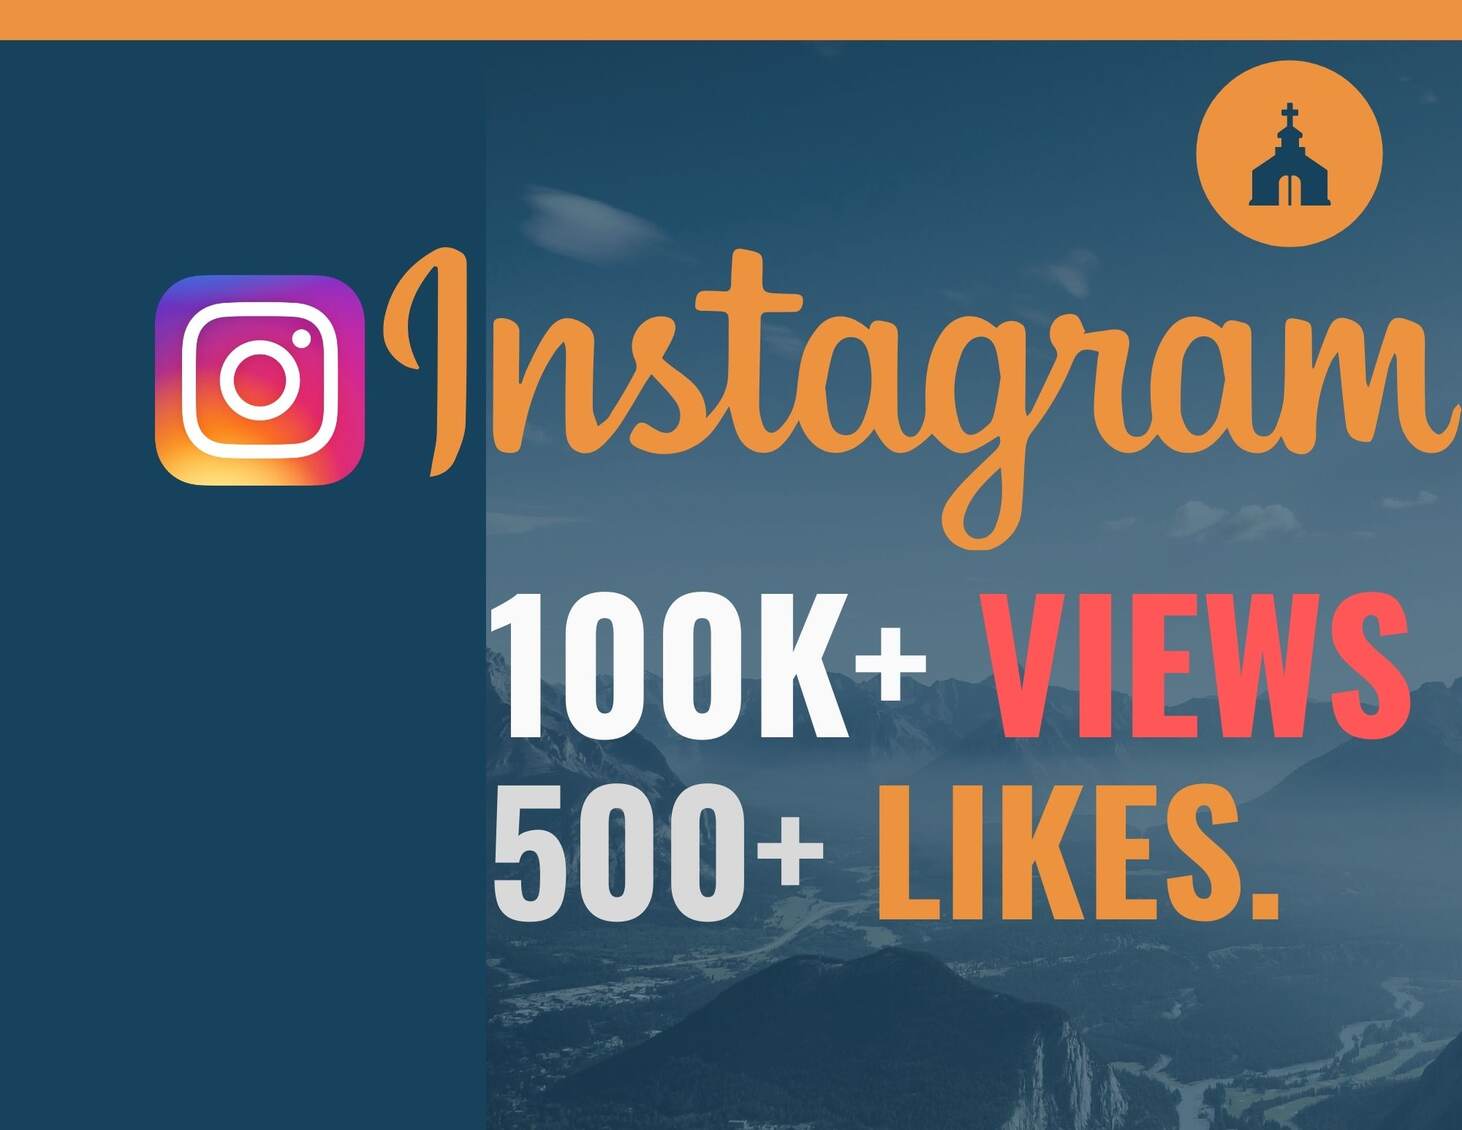 I will provide 100k+ Instagram Views Plus 500+ Likes Instant, lifetime guaranteed, Non-drop & Active user